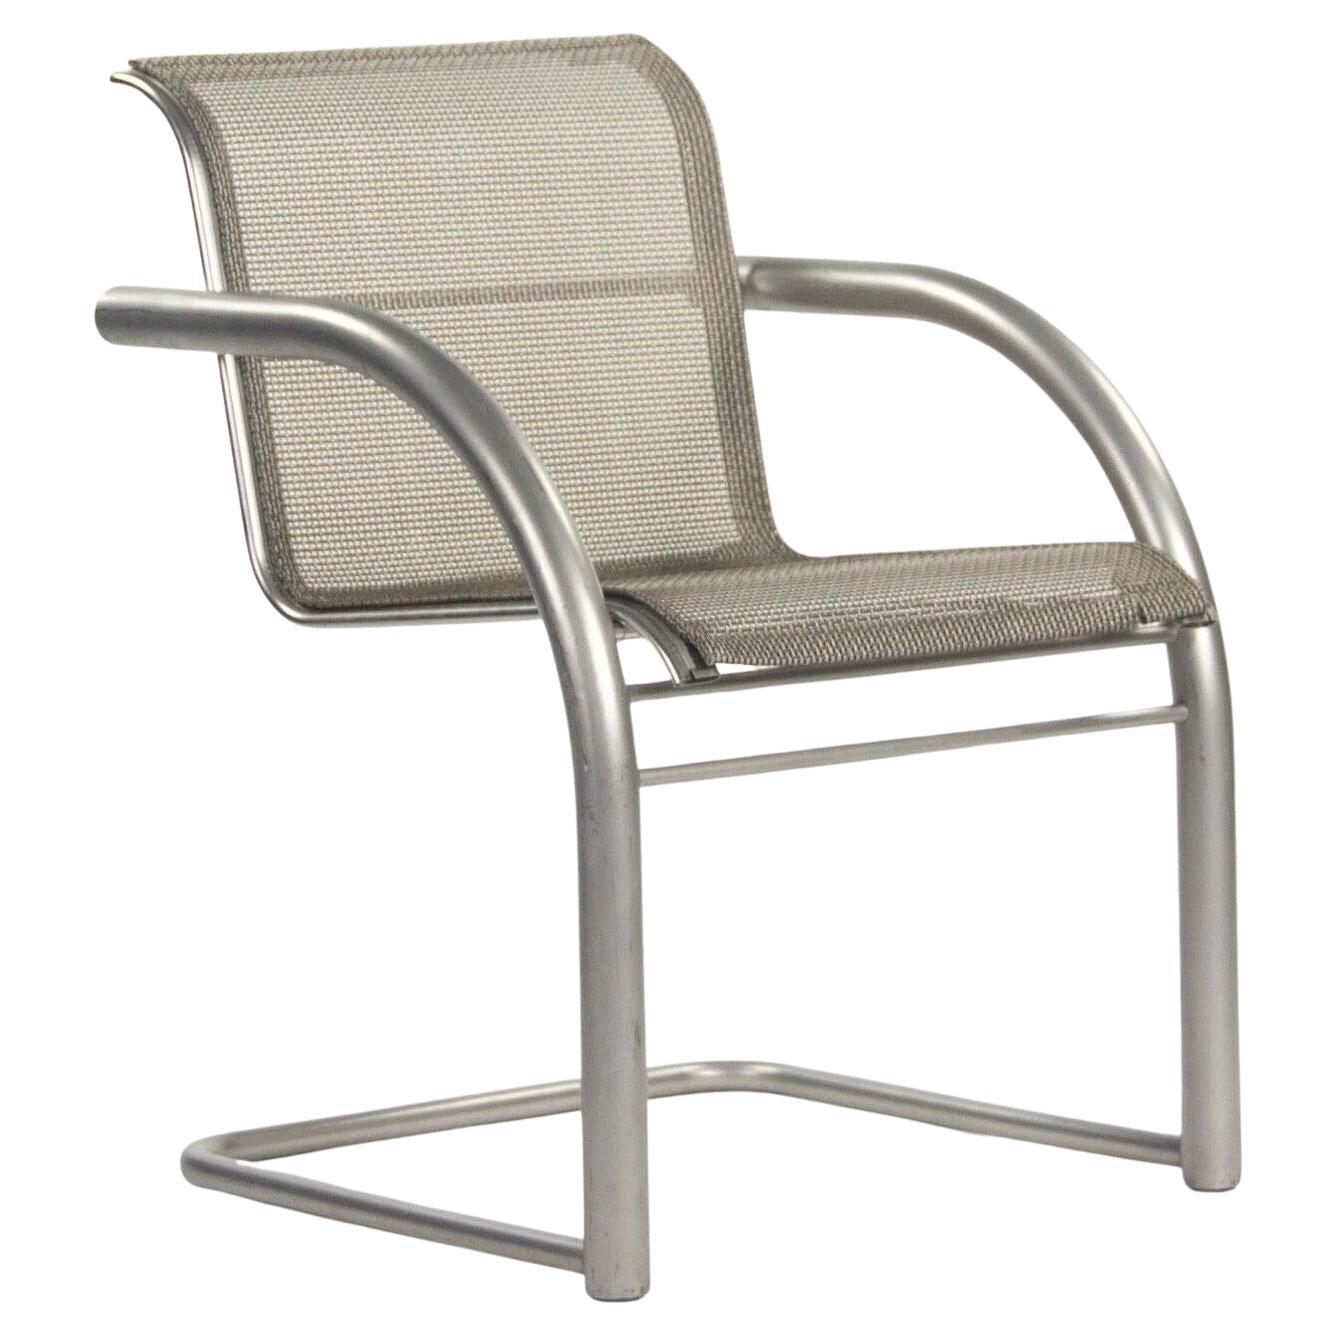 2001 Prototype Richard Schultz 2002 Collection Mesh Cantilever Dining Chair For Sale